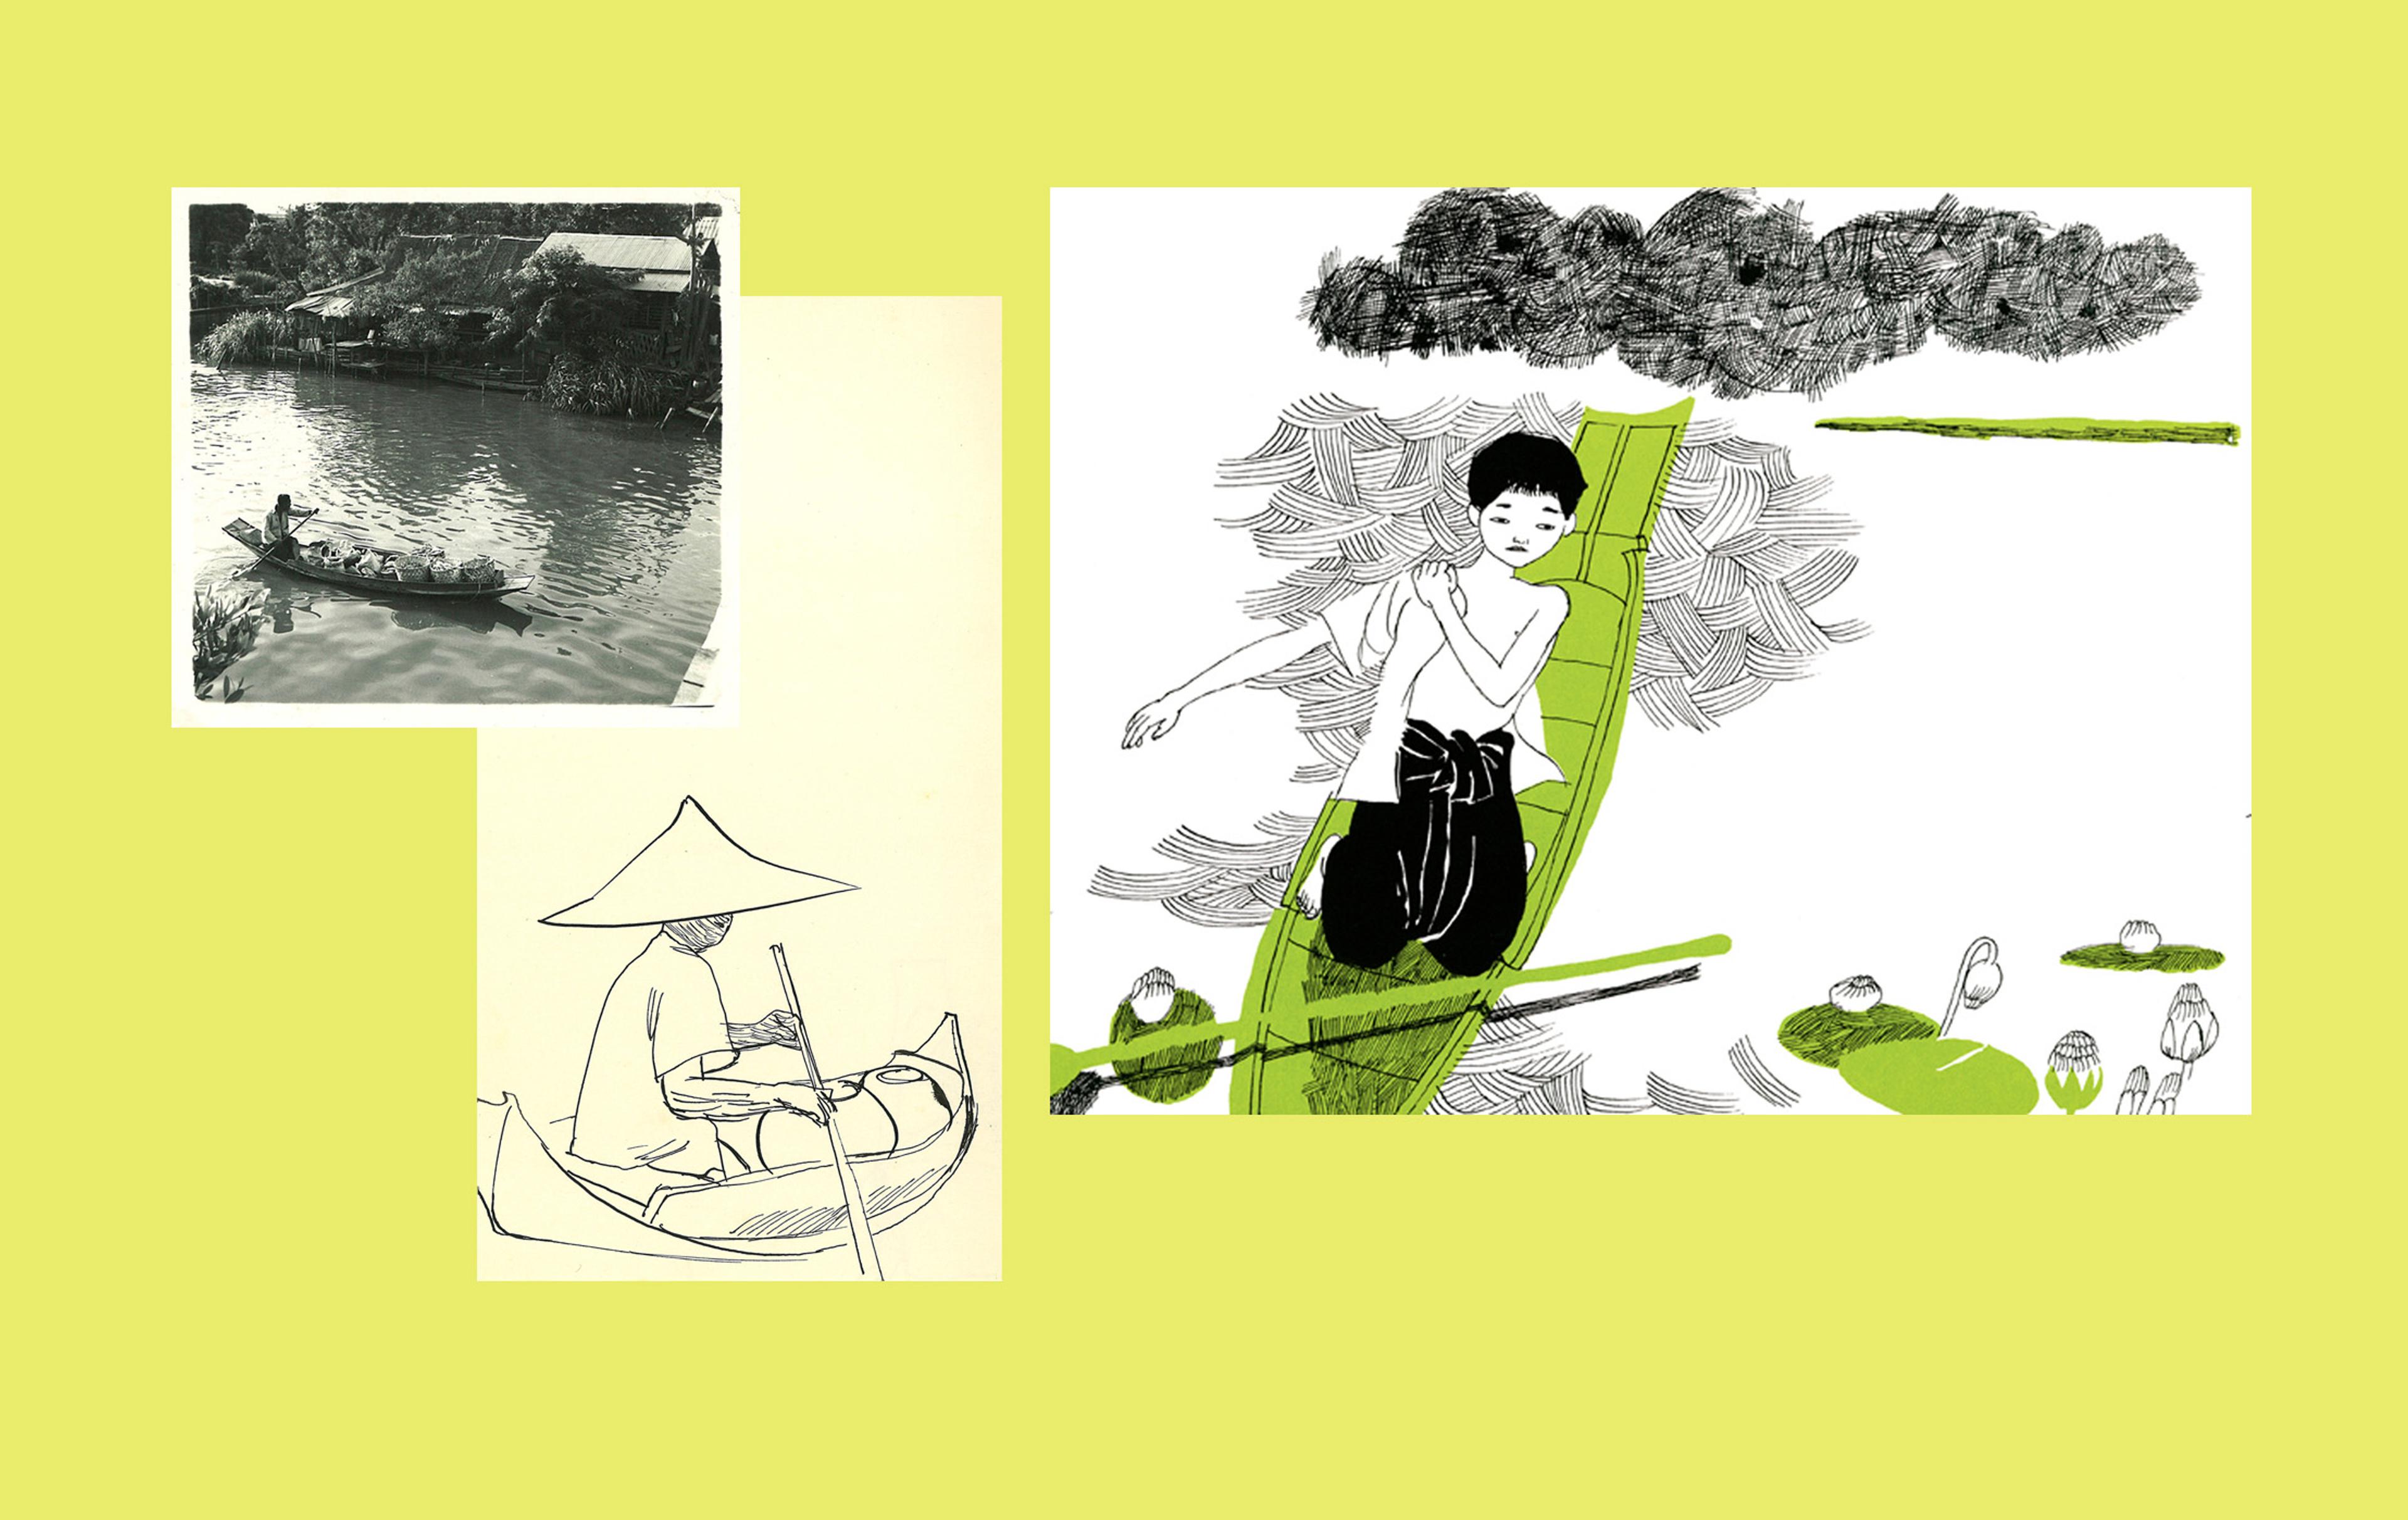 Black and white photograph showing a person in a canoe on a canal in Bangkok, black ink drawing on white paper of a person in a canoe holding a paddle and wearing a hat, black and green ink drawing of a boy in a canoe with a cloud over his head